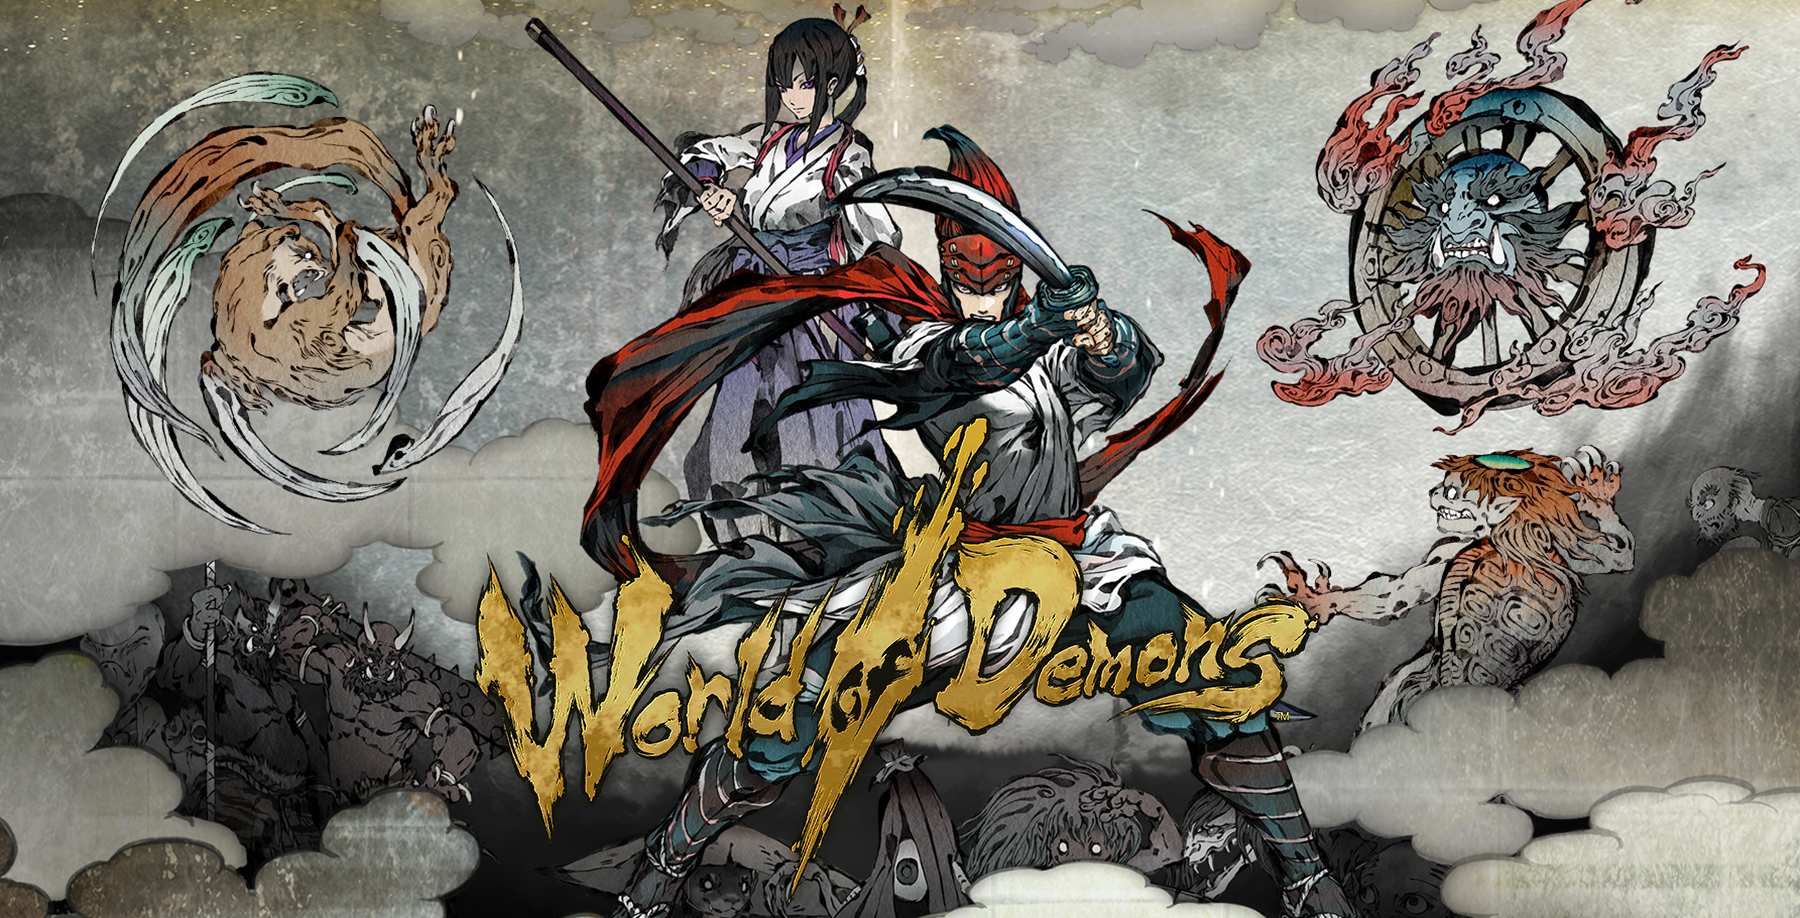 world of demons android download